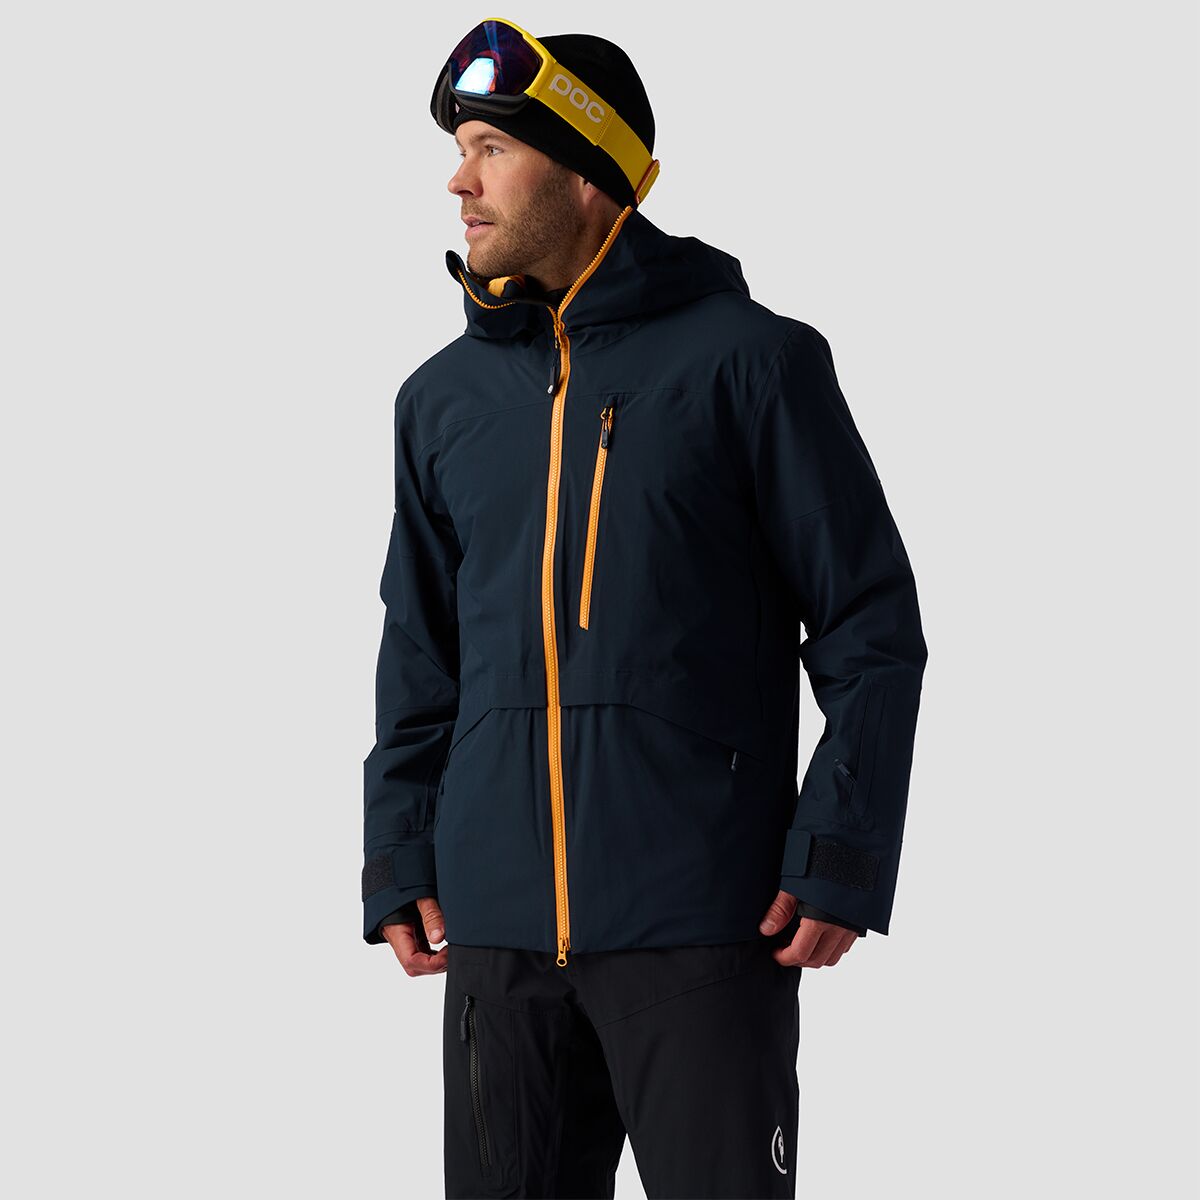 Backcountry Last Chair Stretch Insulated Jacket - Men's